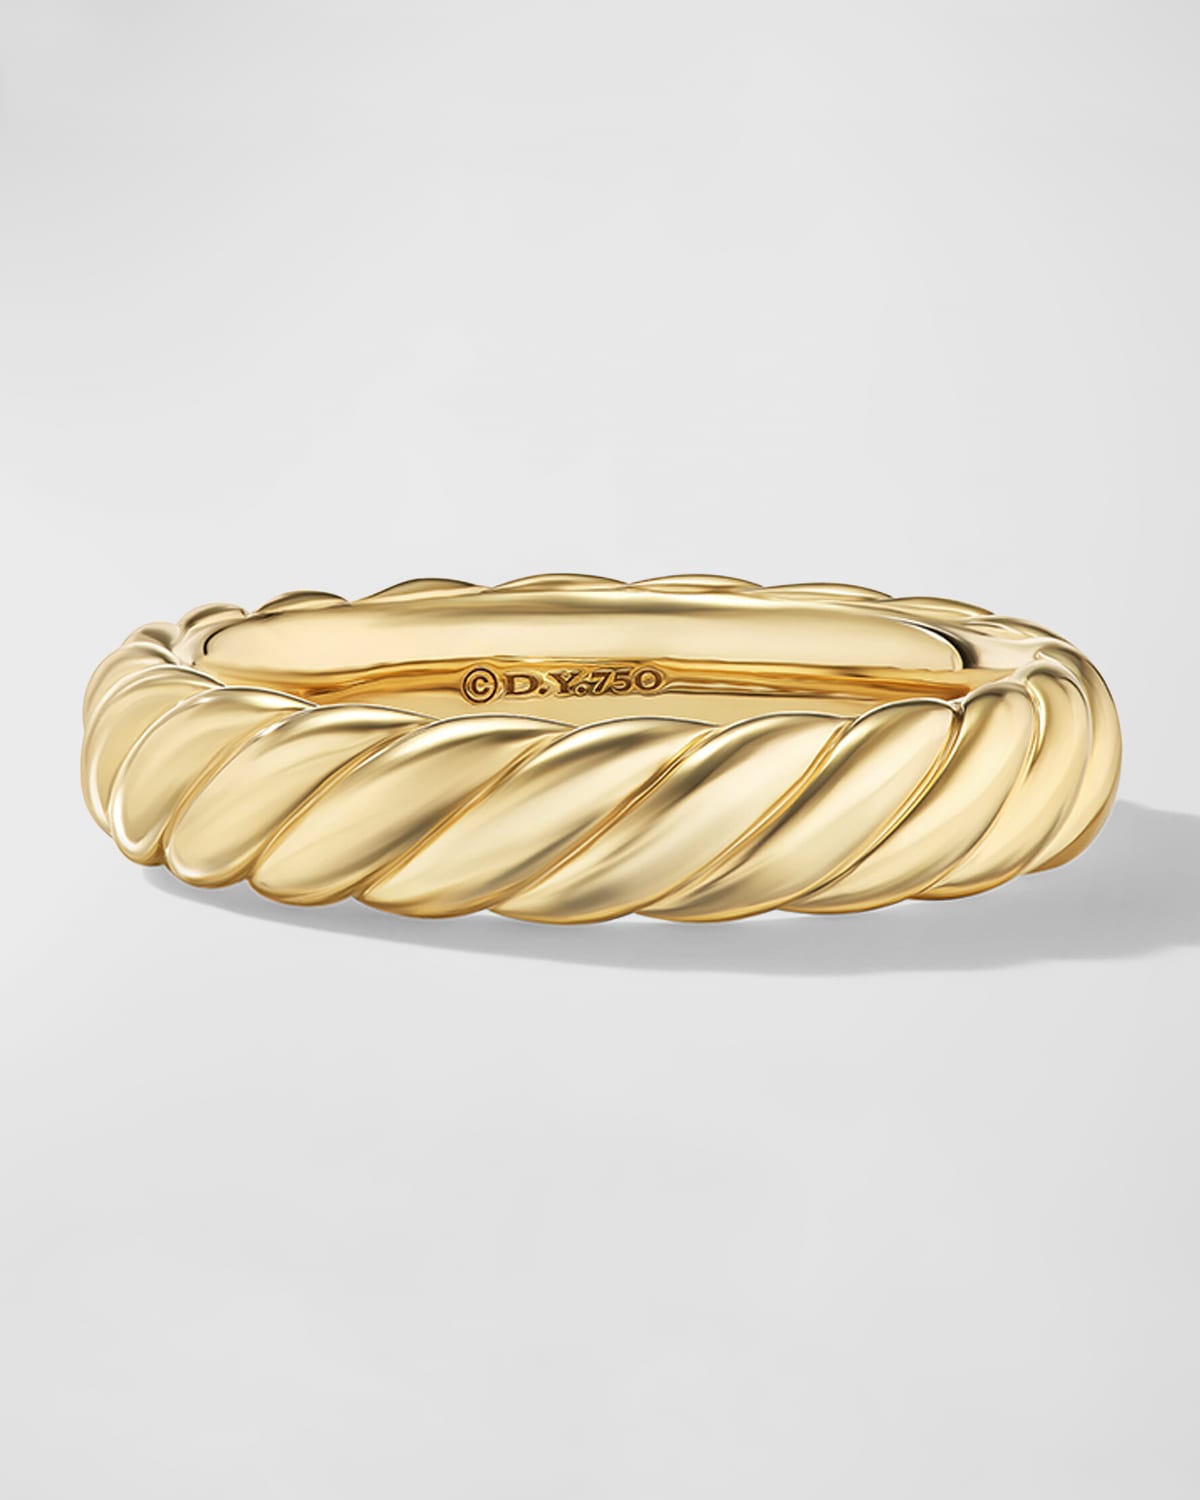 David Yurman Sculpted Cable Band Ring in 18K Gold, 4.5mm, Size 7